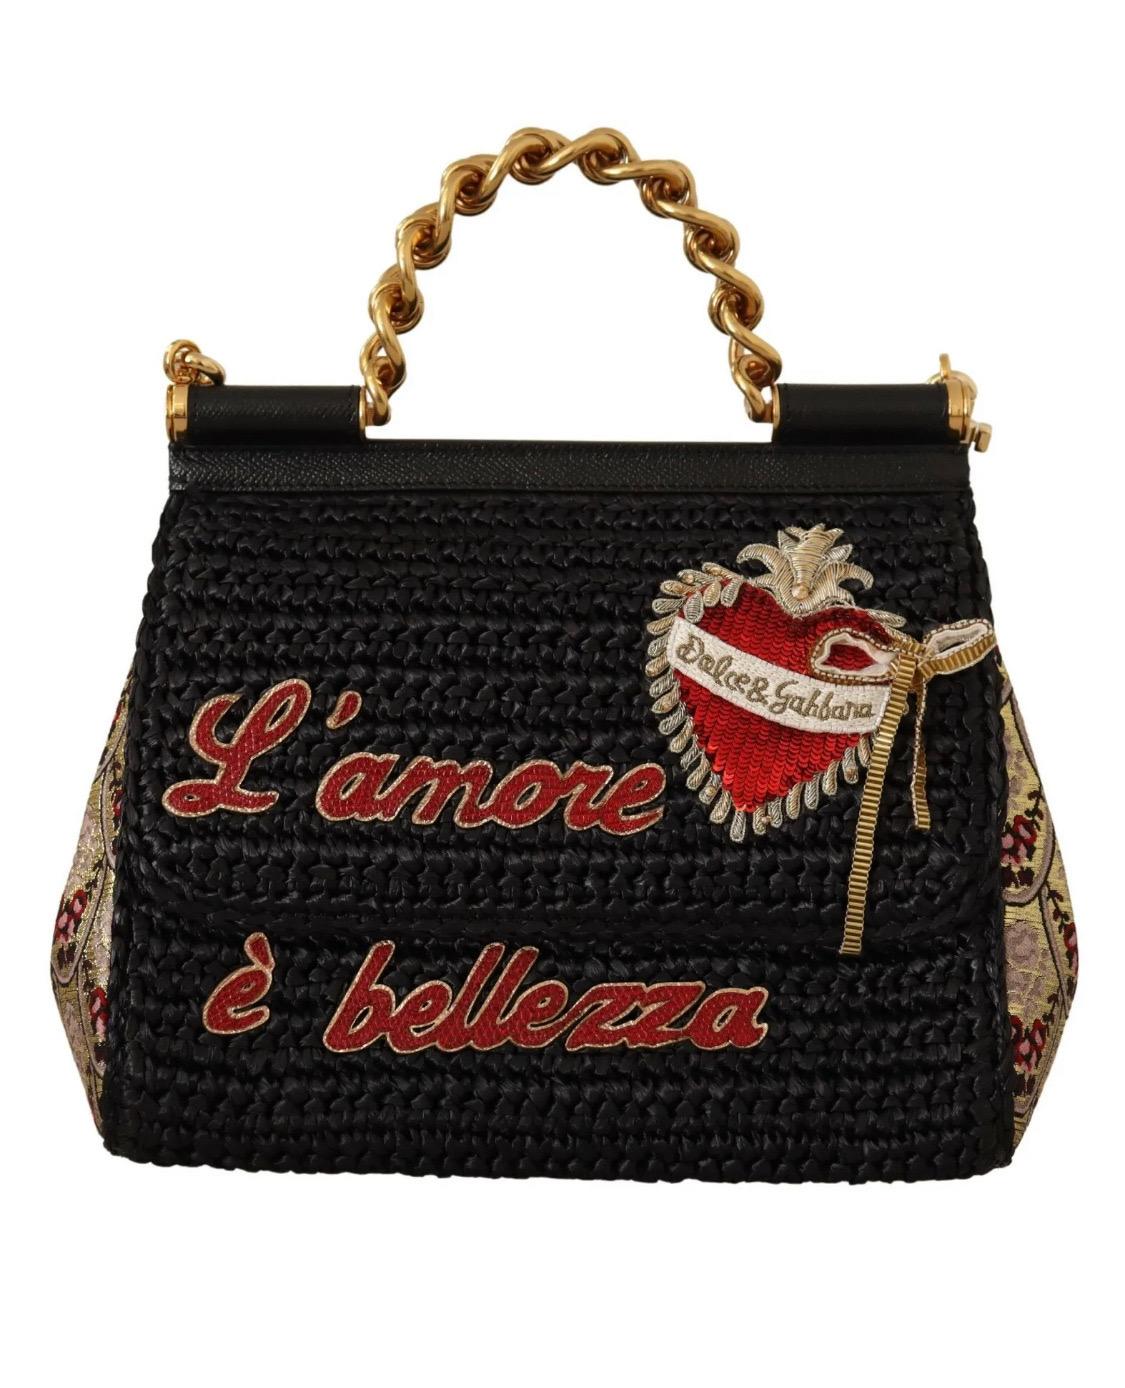 Dolce & Gabbana
Gorgeous brand new with tags, 100% Authentic Dolce & Gabbana Sicily purse bag.

Model: SICILY
Strap: One handle, adjustable and detachable shoulder strap
Color: Black, with gold metal detailing
Motive: L’amore e Bellezza
Magnetic